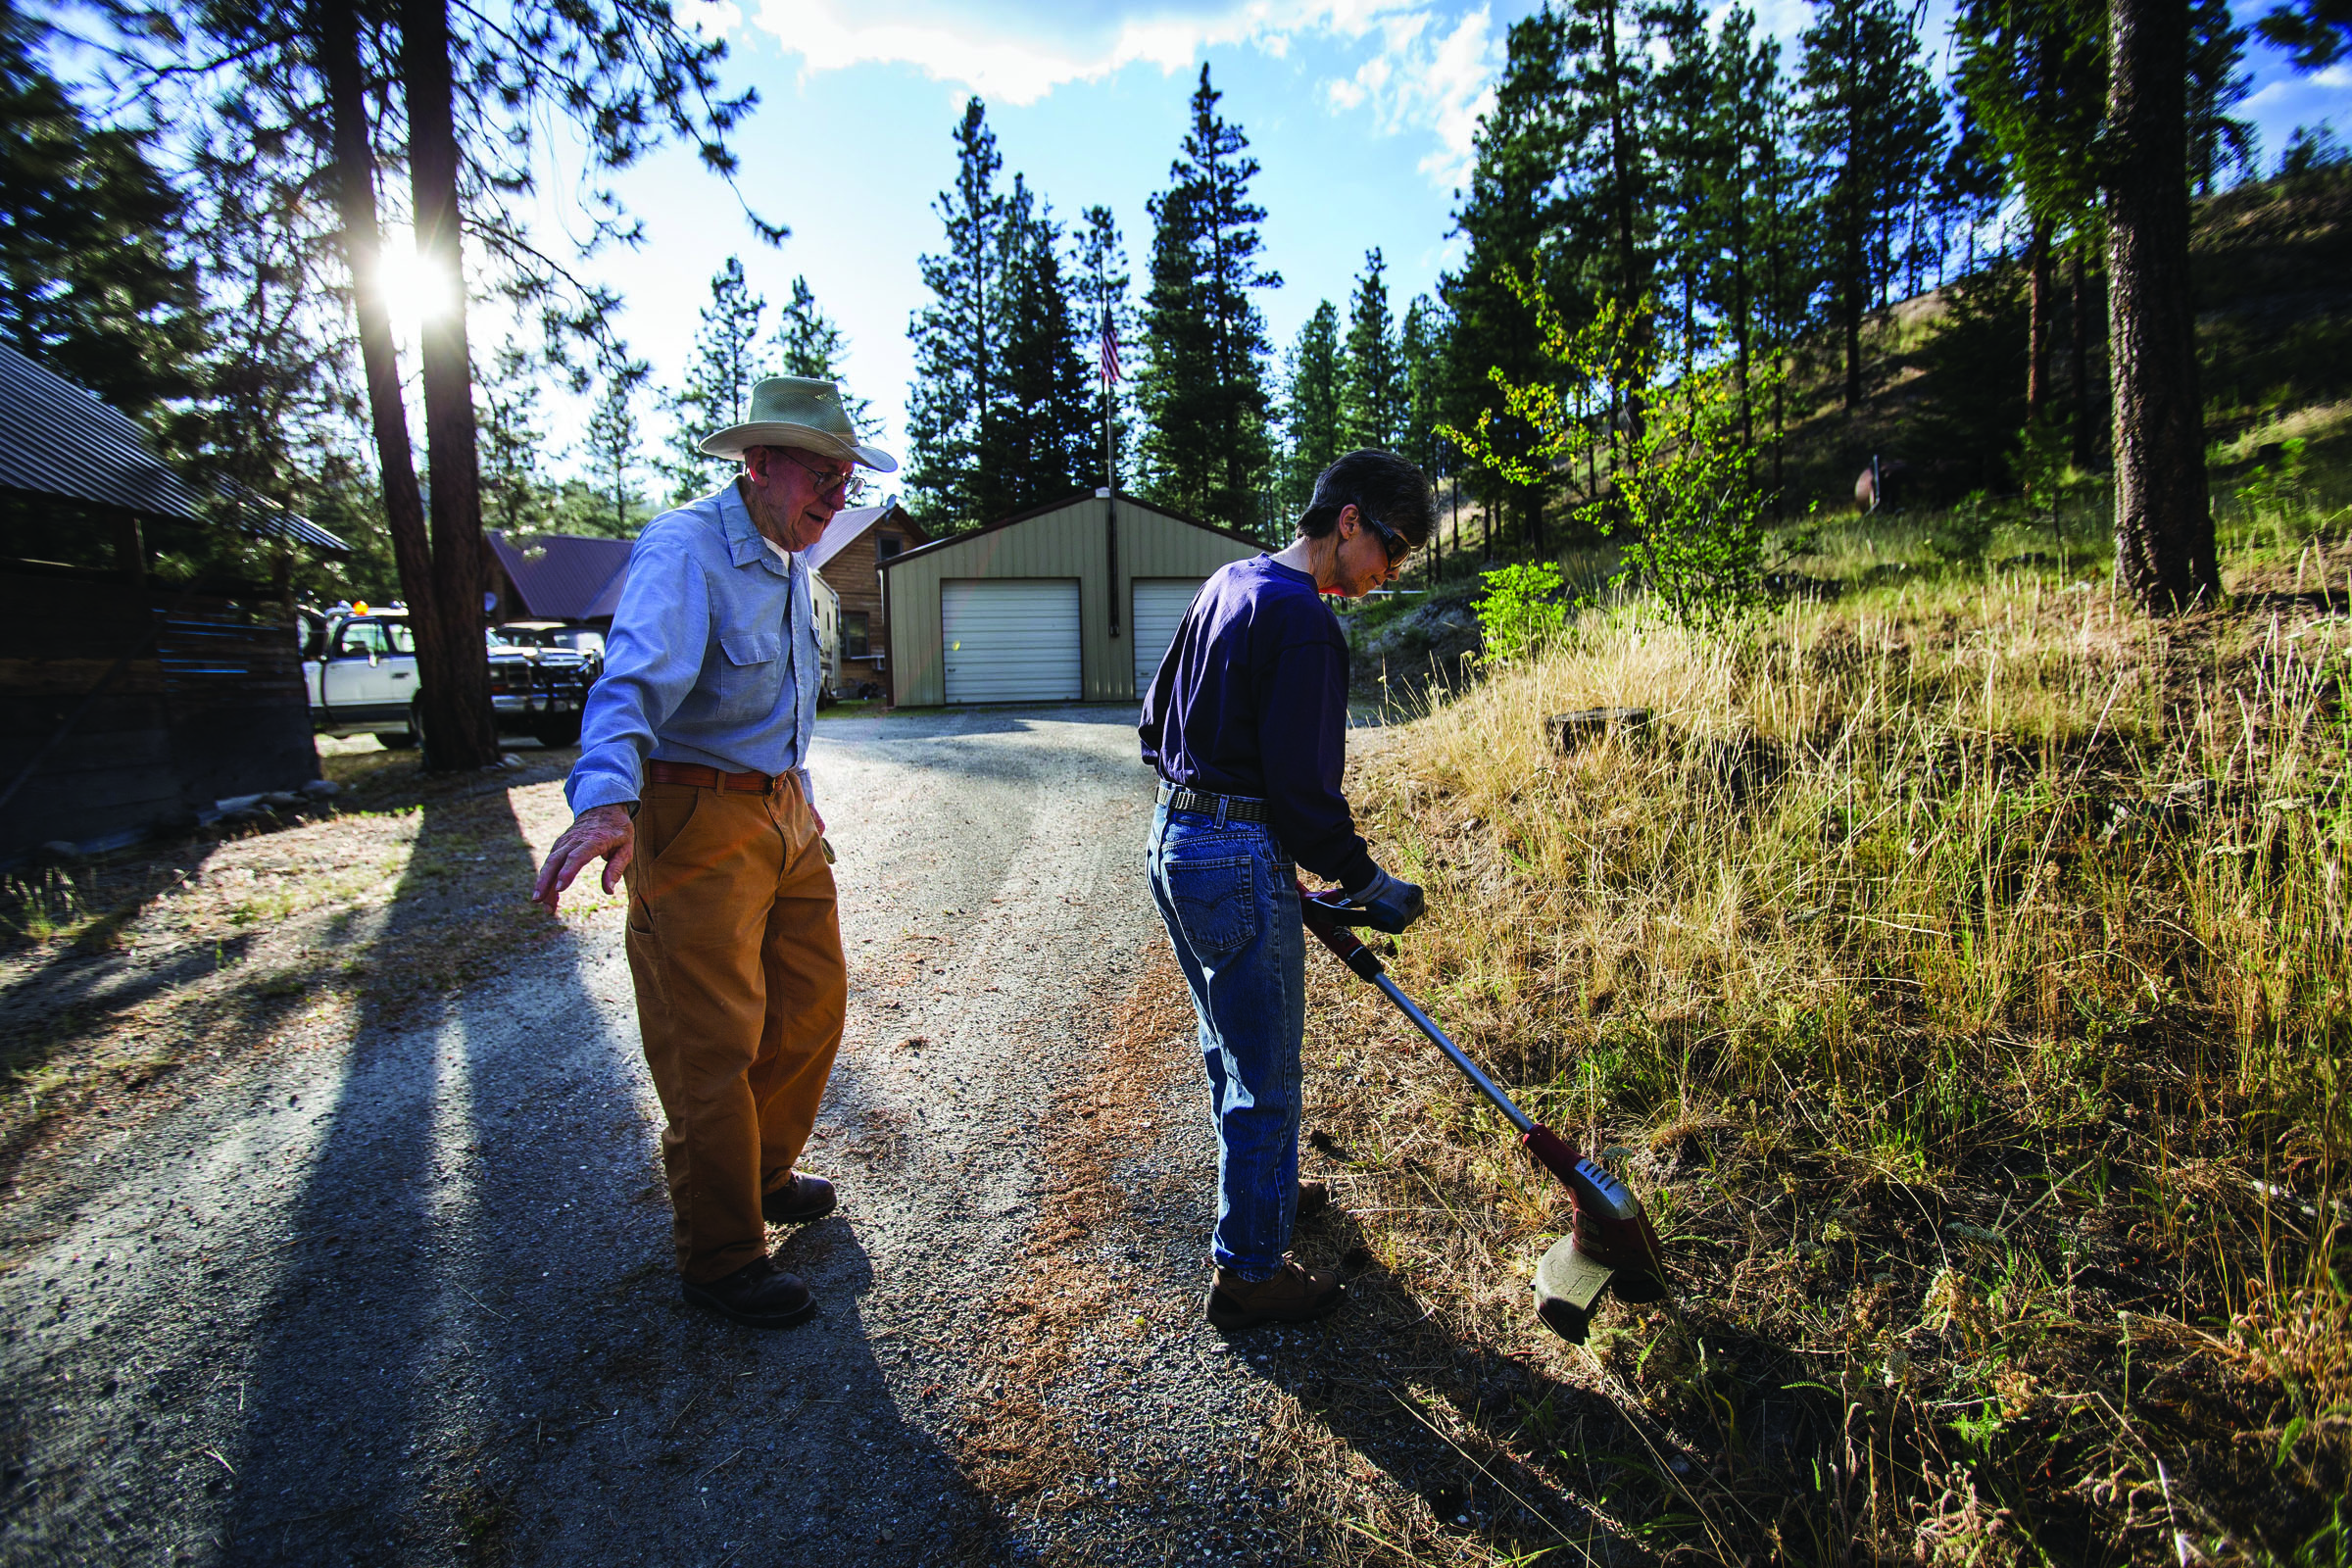 Peggy Kelly cuts back grasses as Noble Kelly supervises at their home in the Chiliwist area of Okanogan County. With the Kellys leading about 40 property owners